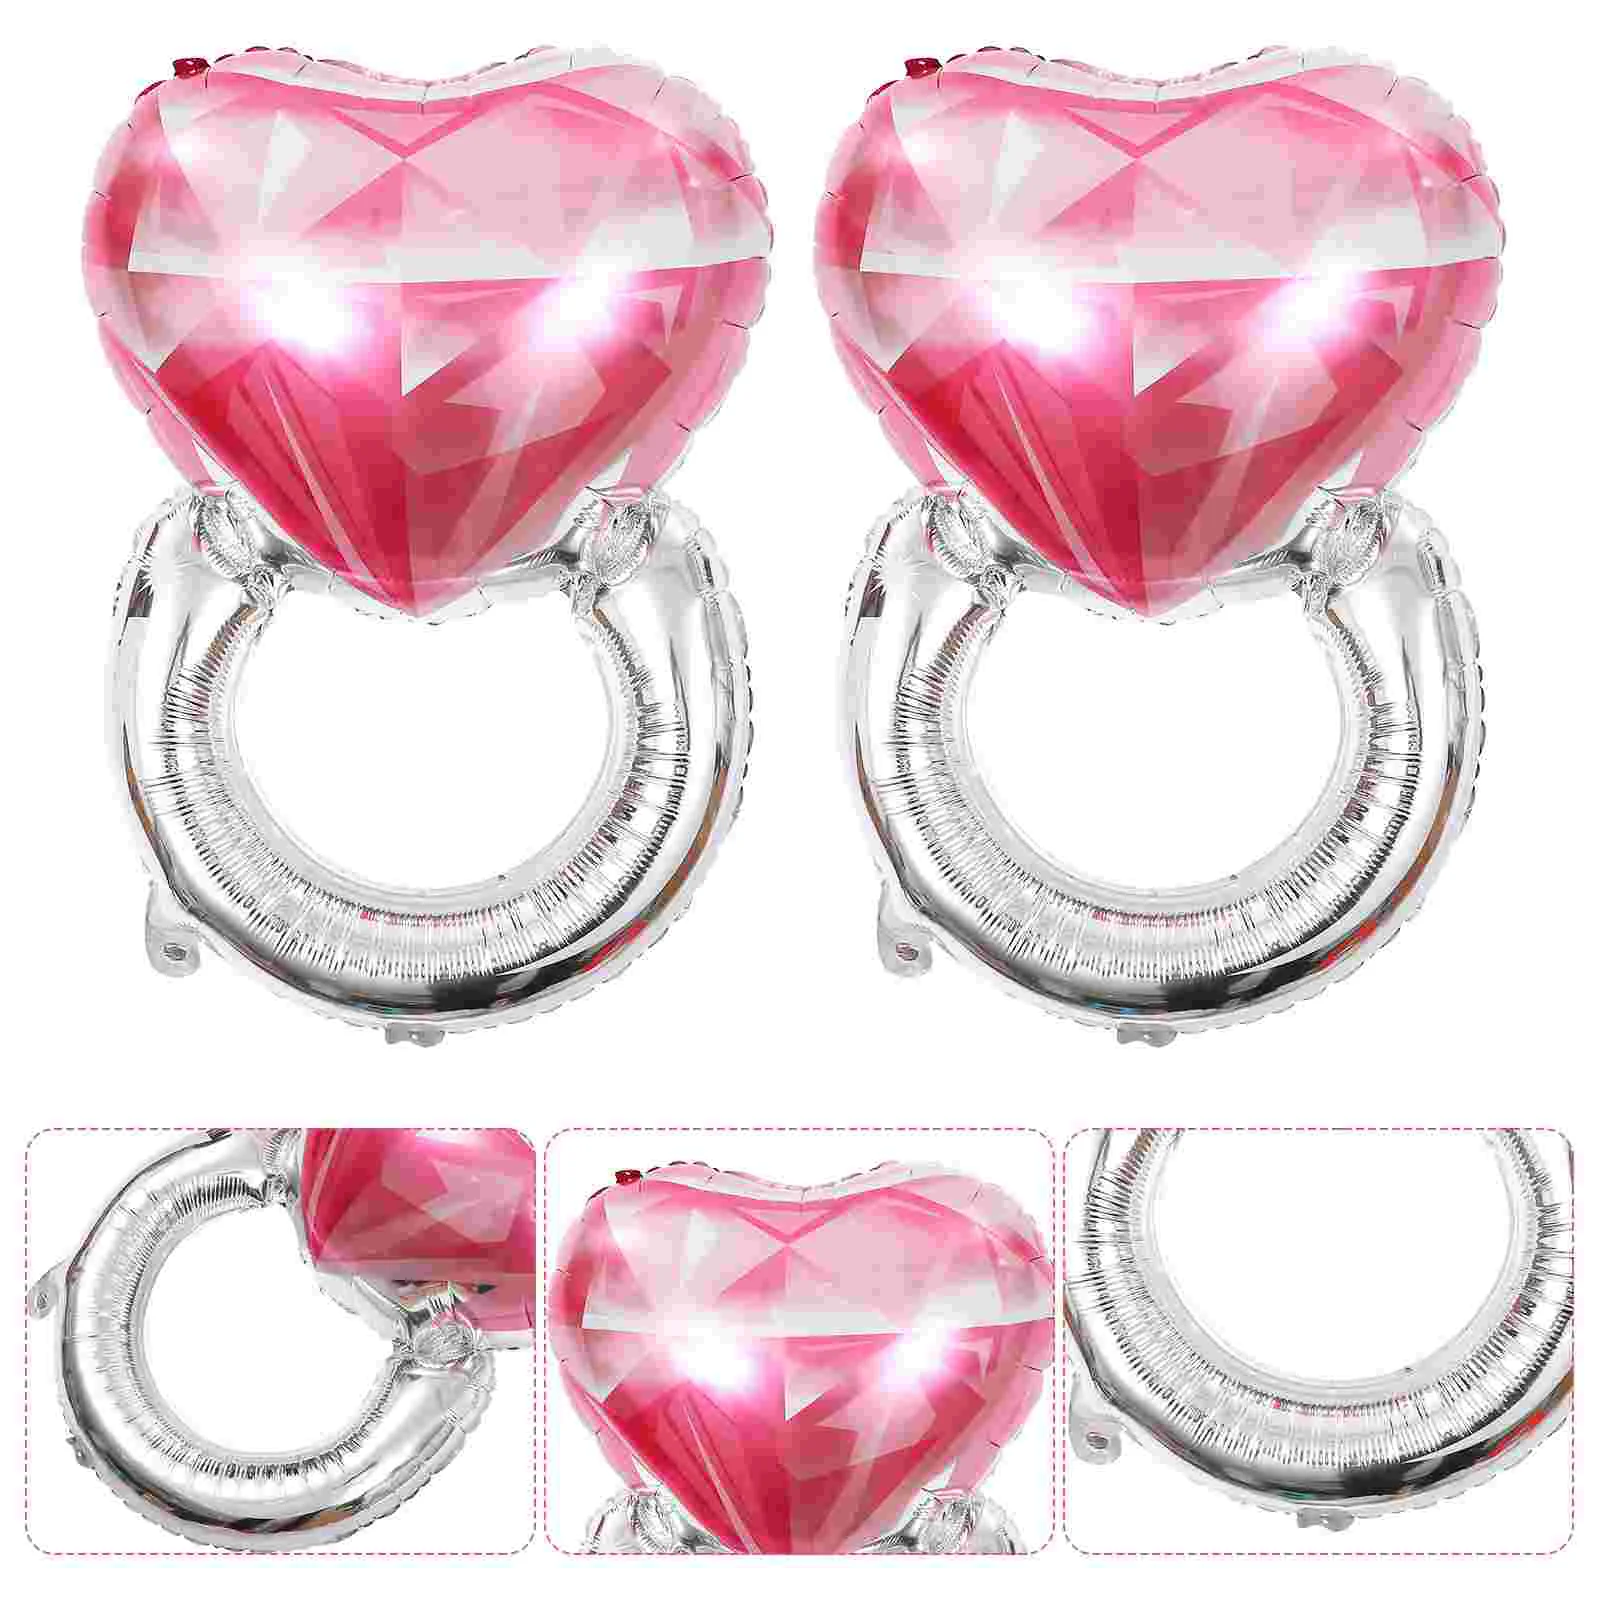 

Balloon Balloons Ring Wedding Foil Bridal Shower Engagement Party Mylar Inflatable Big Heart Aluminum Marriage 3D Shape Proposal